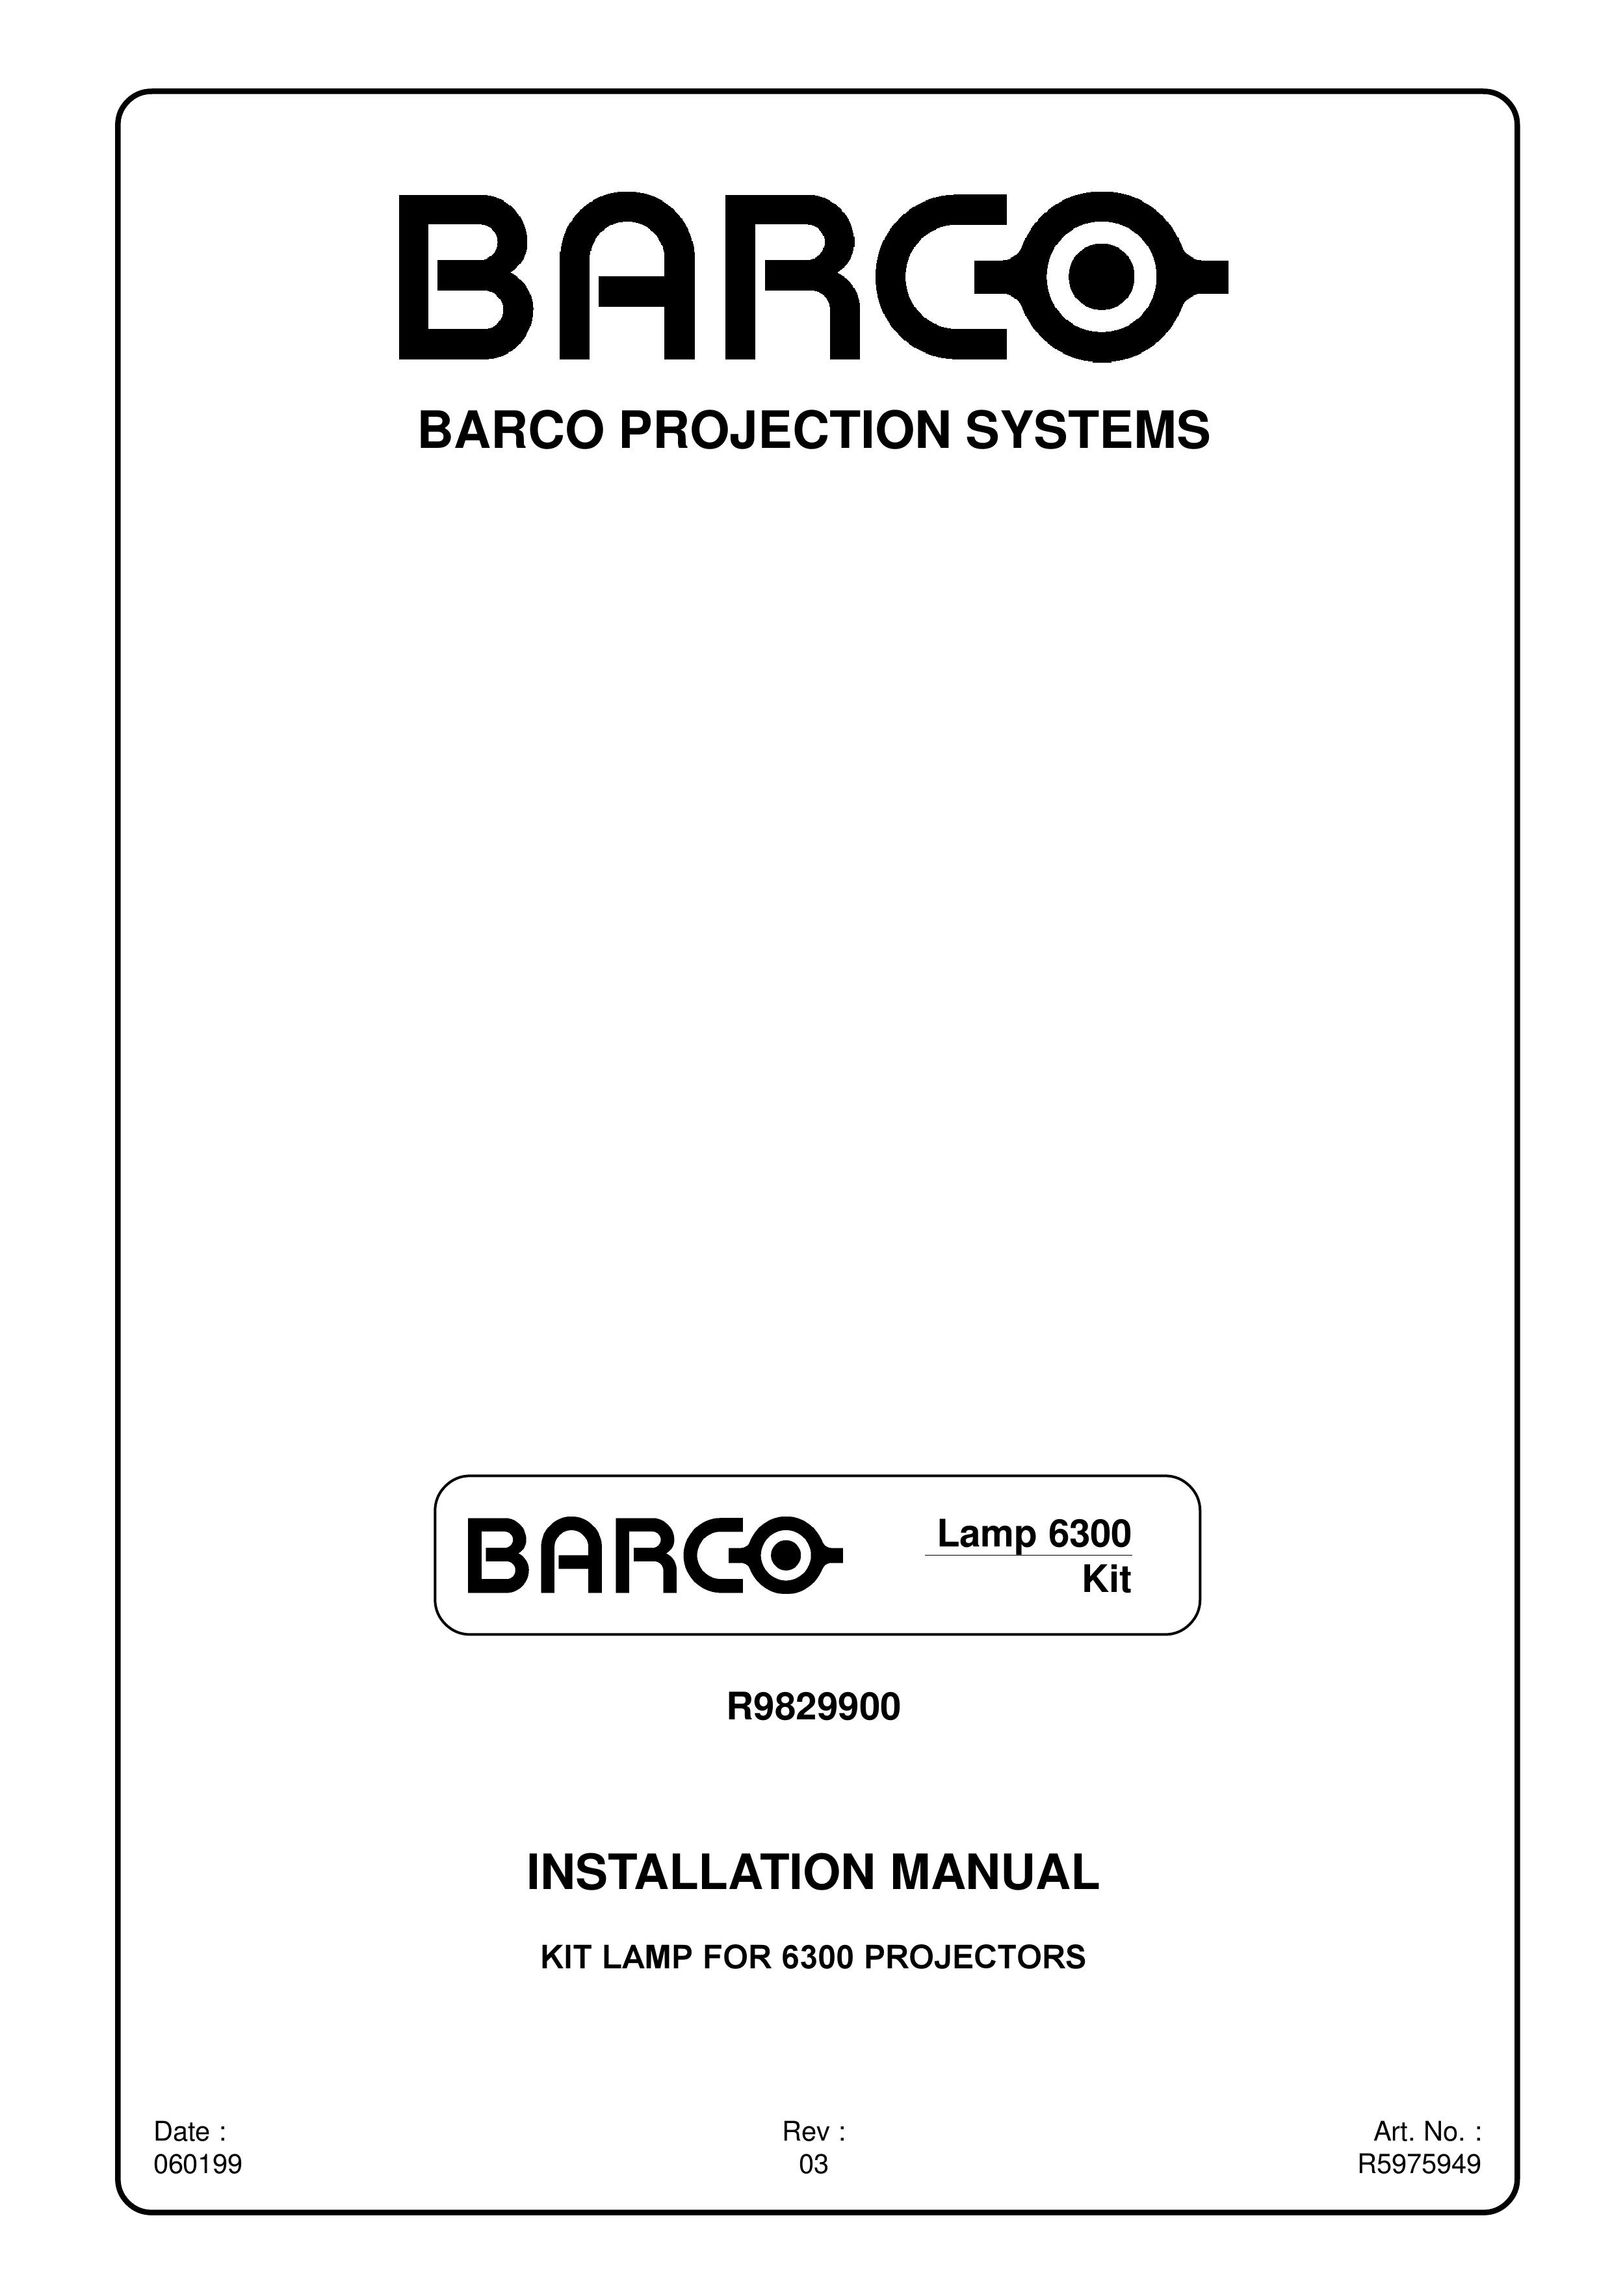 Barco R5975949 Projector Accessories User Manual